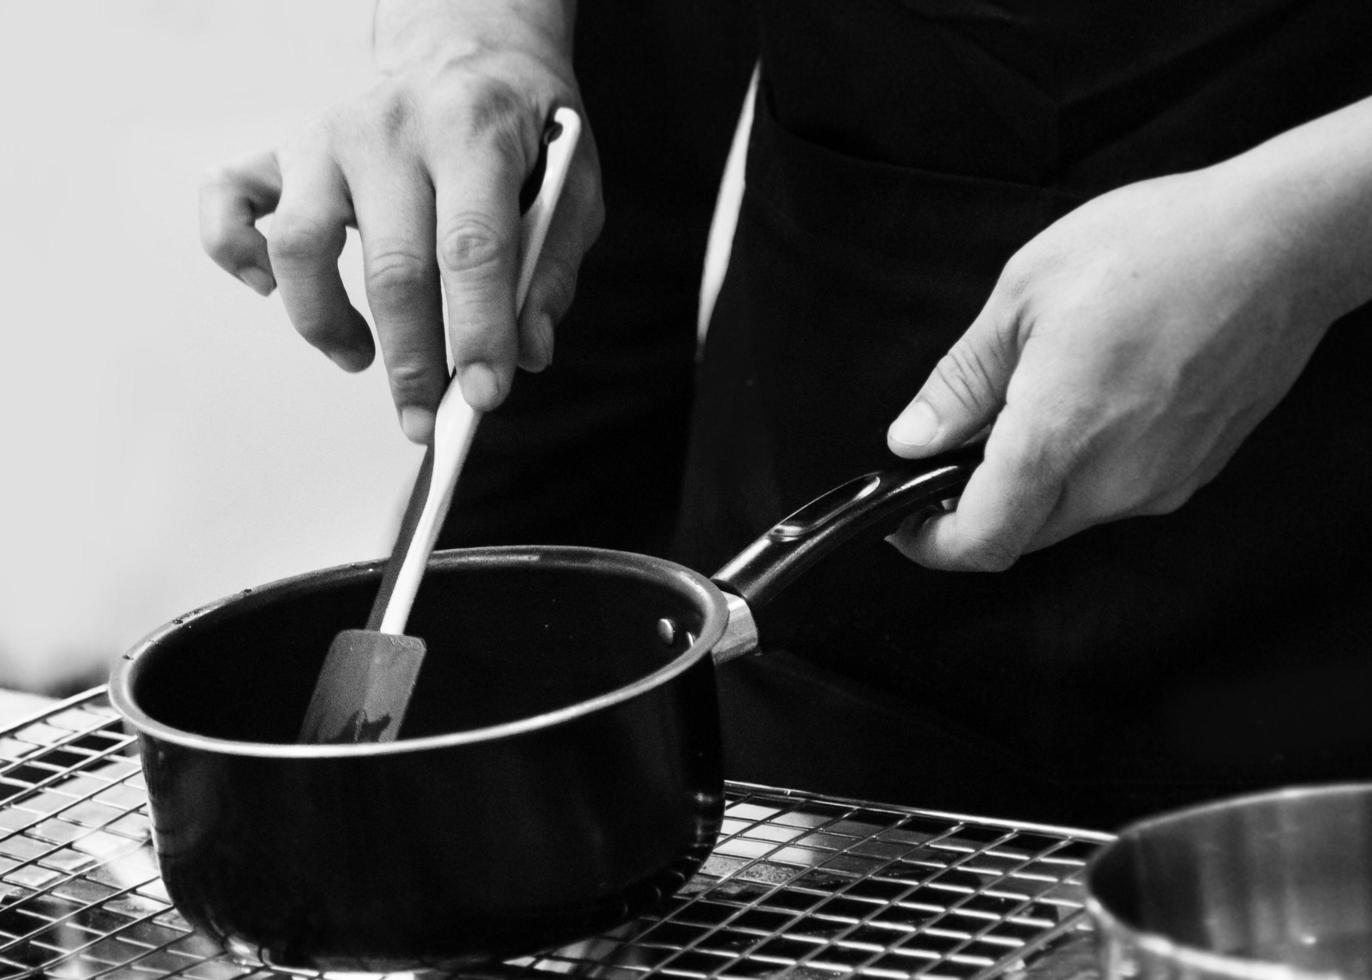 chef preparing food, chef cooking in a kitchen Black and White photo